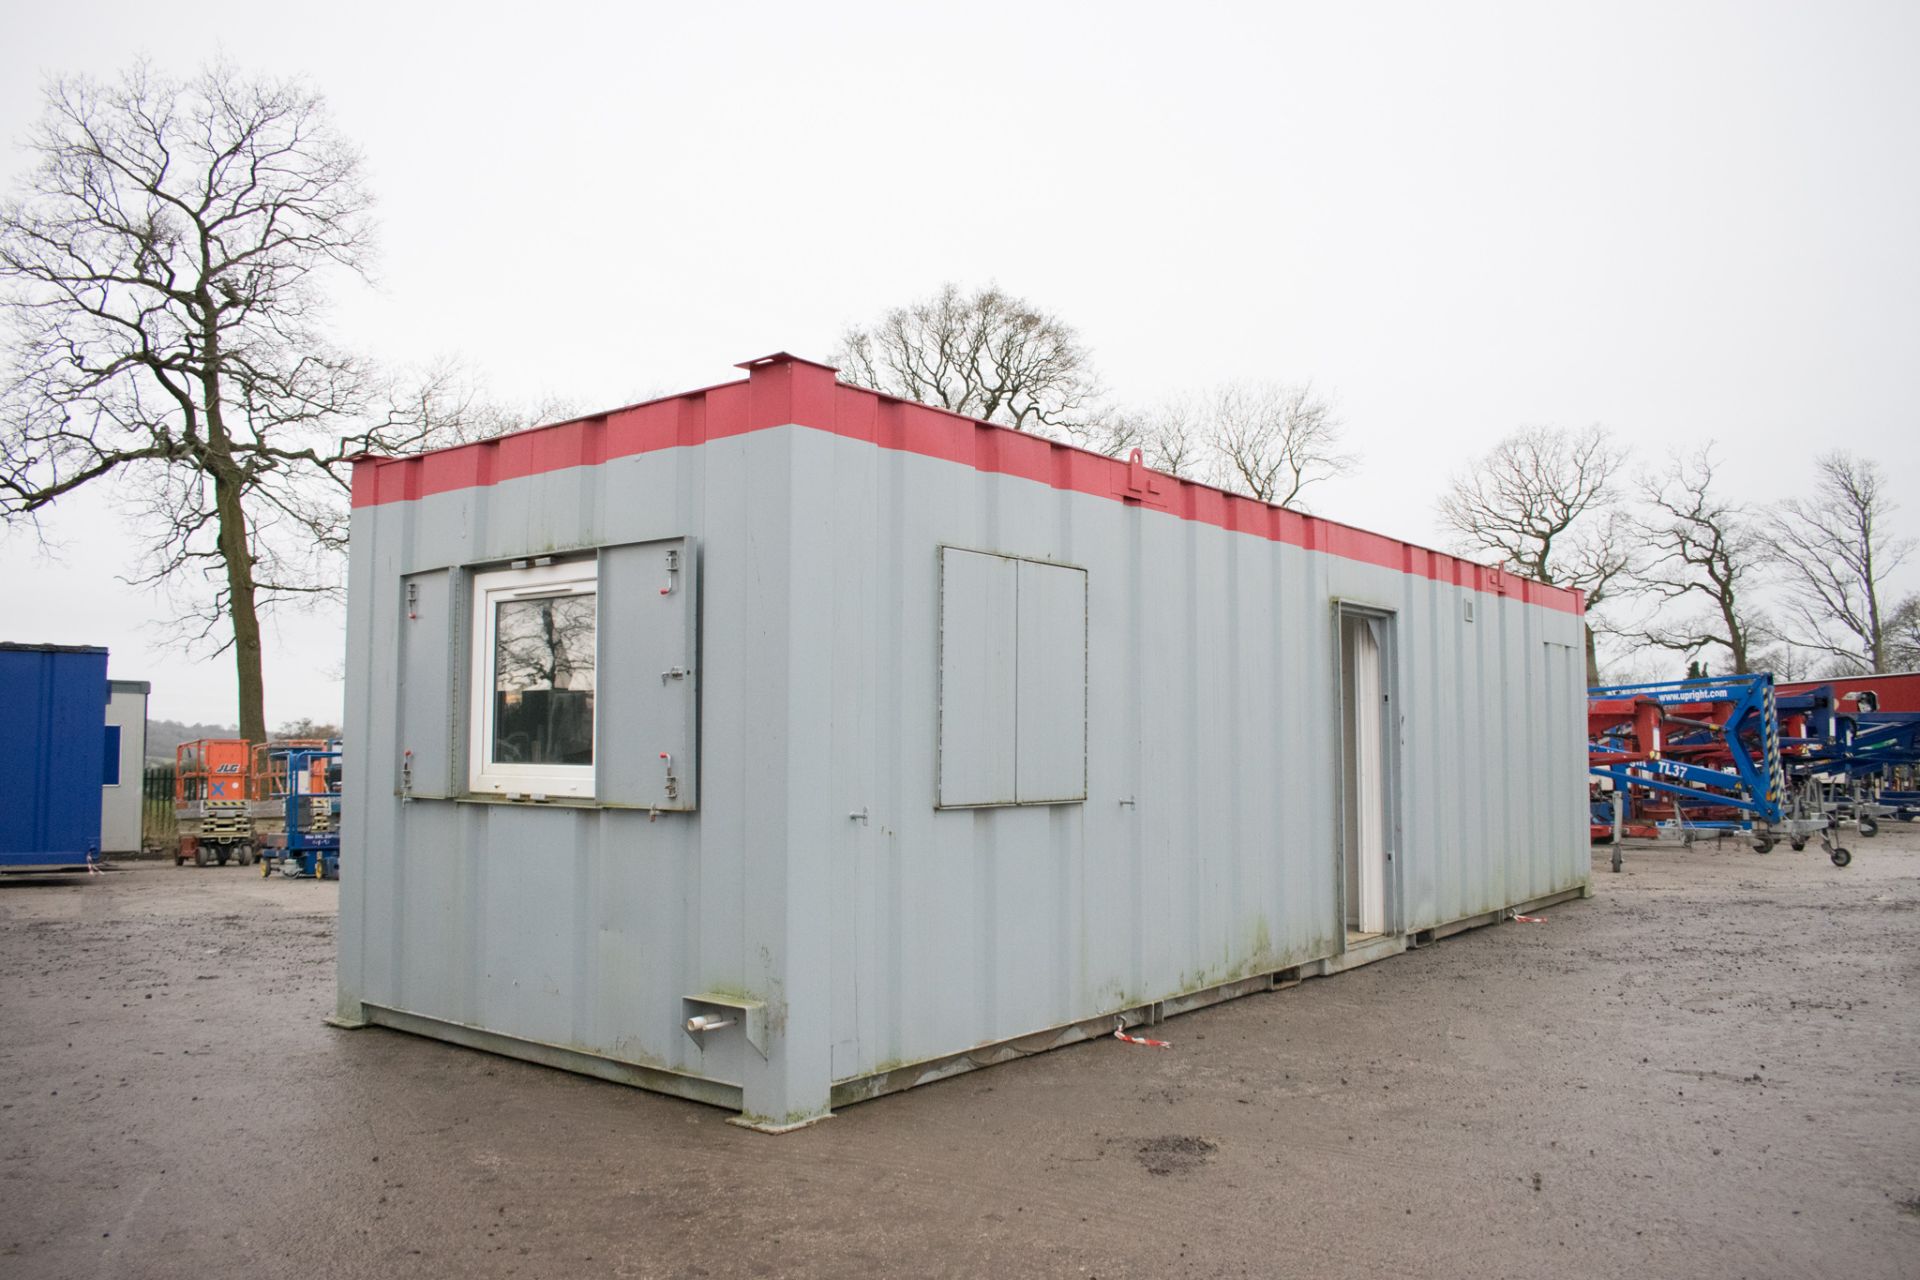 32 ft x 10 ft steel anti vandal office/toilet site unit Comprising of: lobby, office, gent